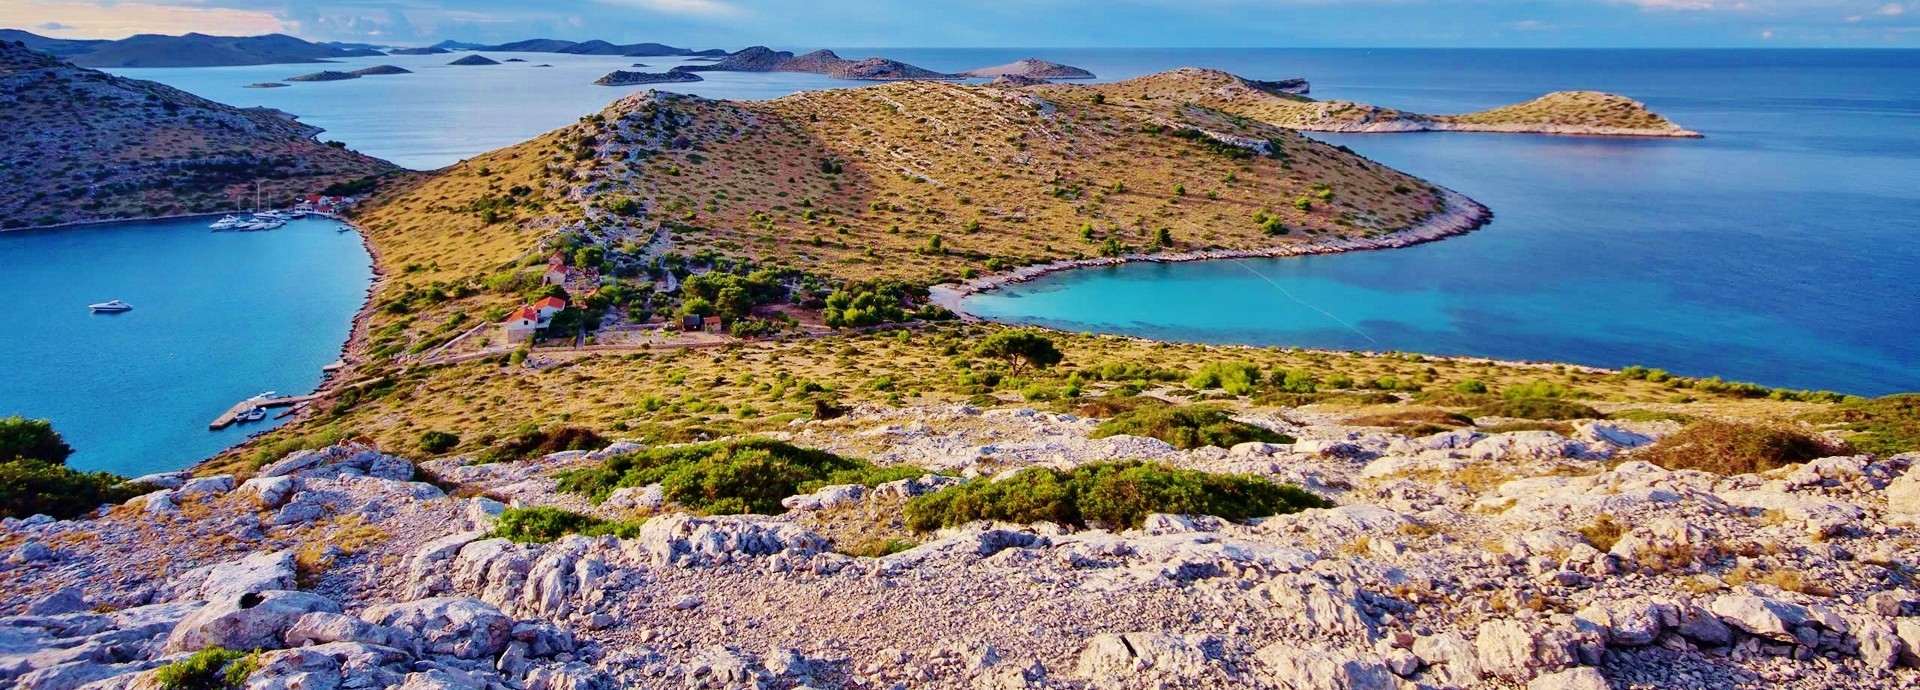 View of the Kornati Islands from the top of the hill